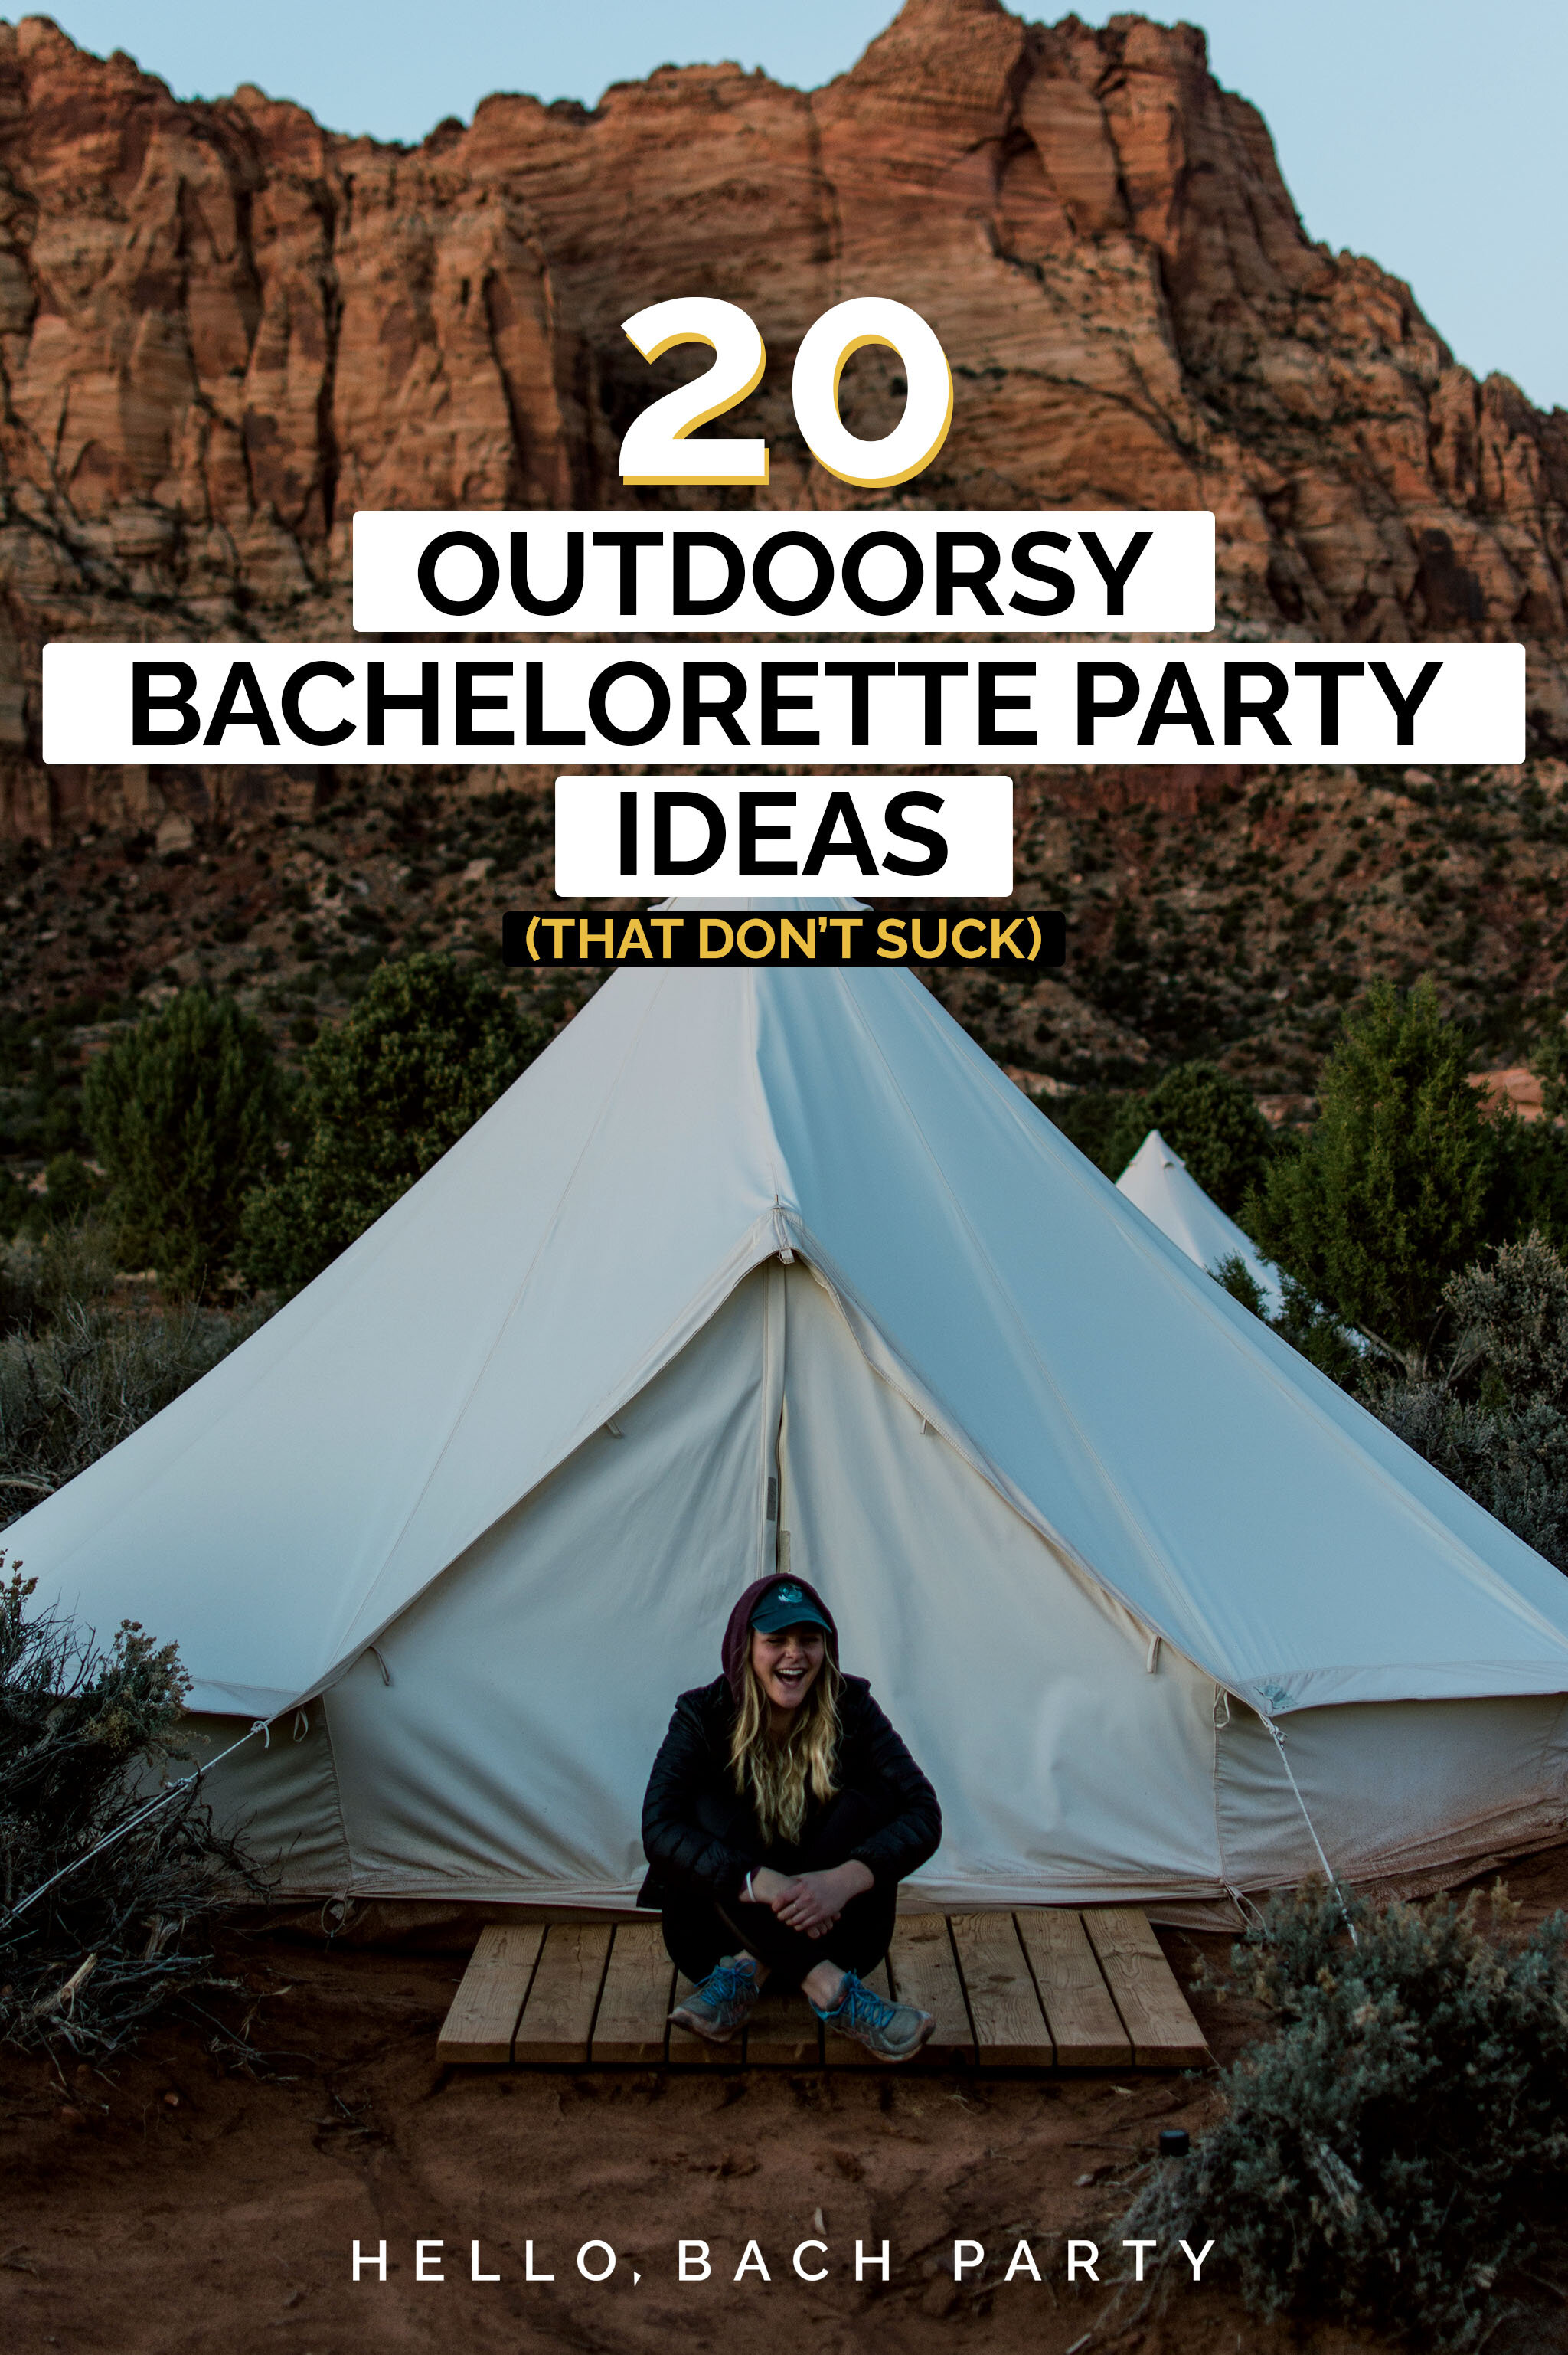 25 New Ideas for Amazing Bachelor and Bachelorette Parties